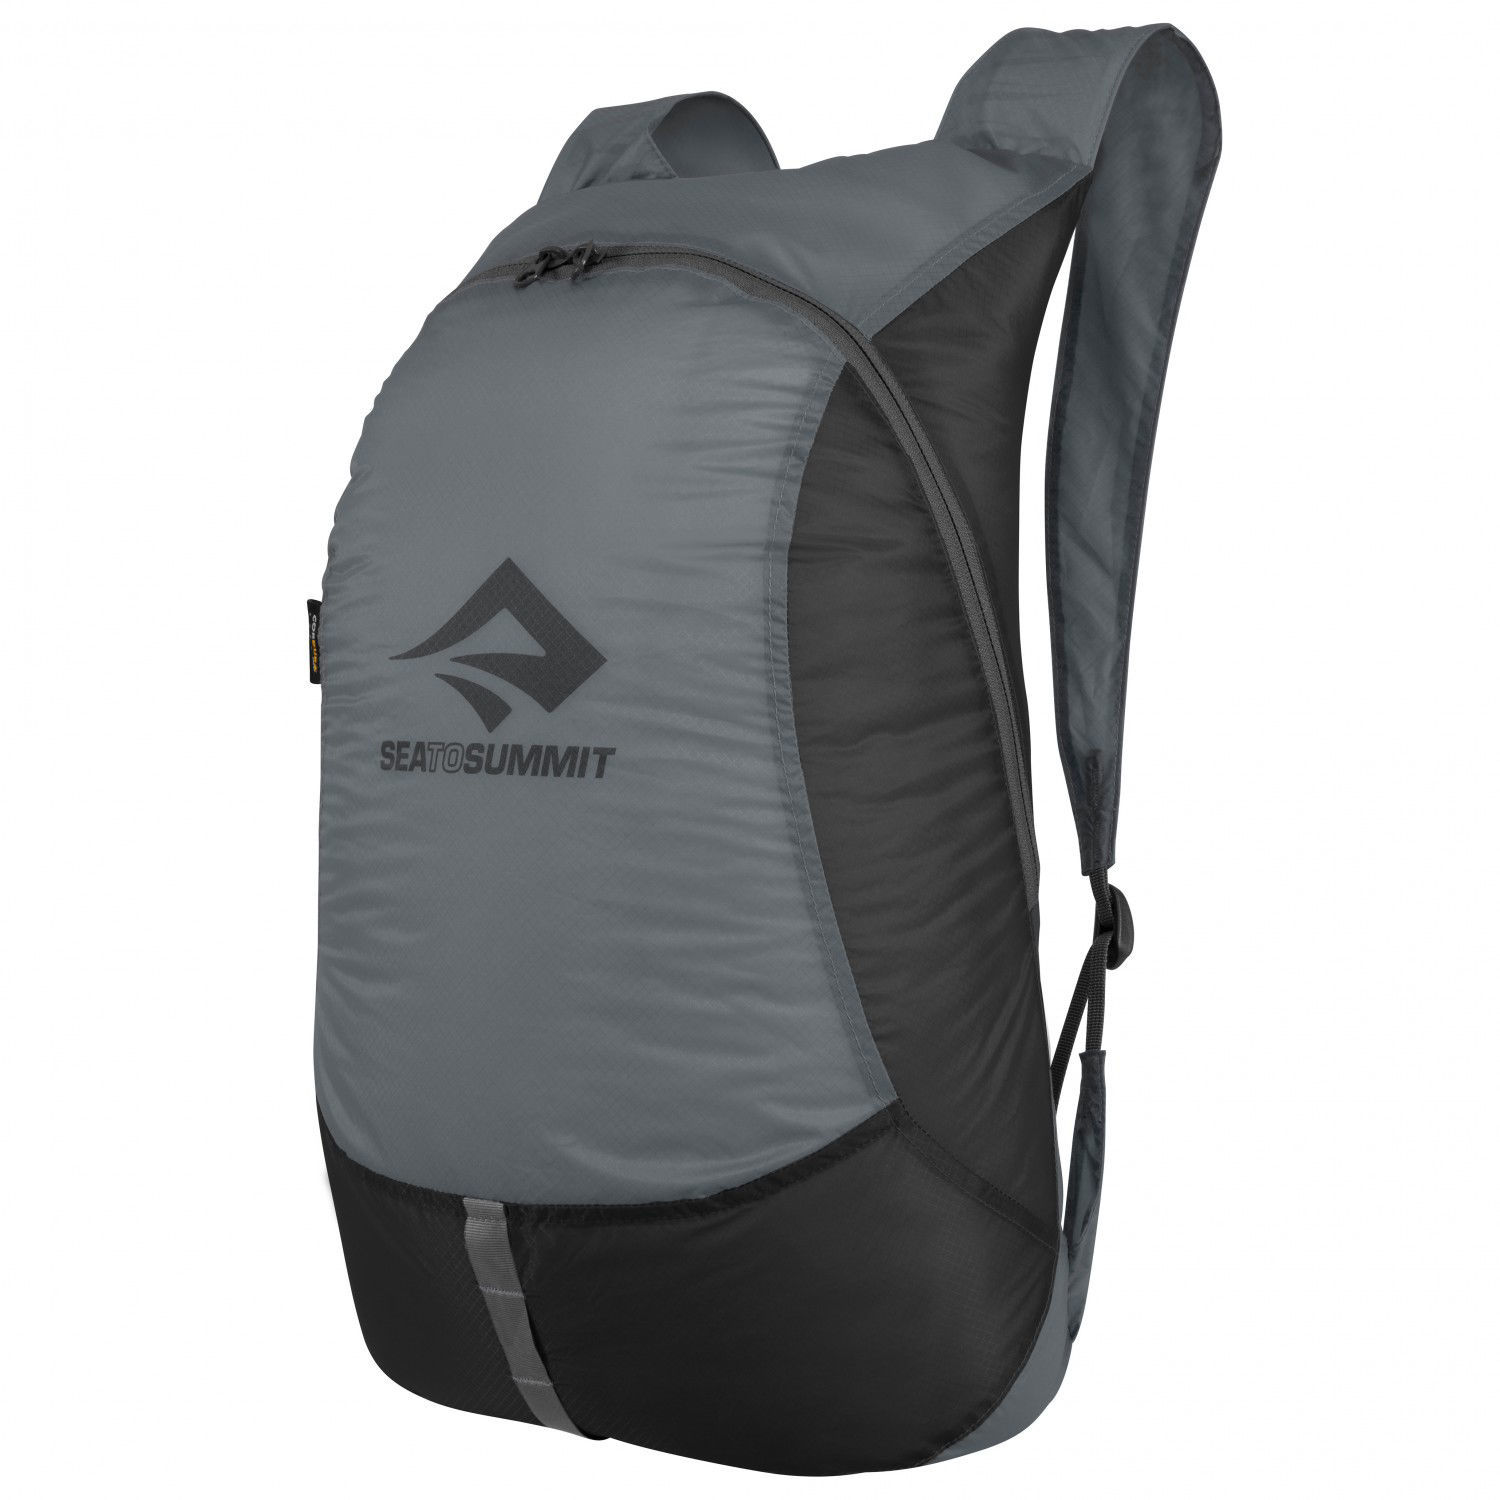 Sea to Summit Ultra-Sil Daypack in Black